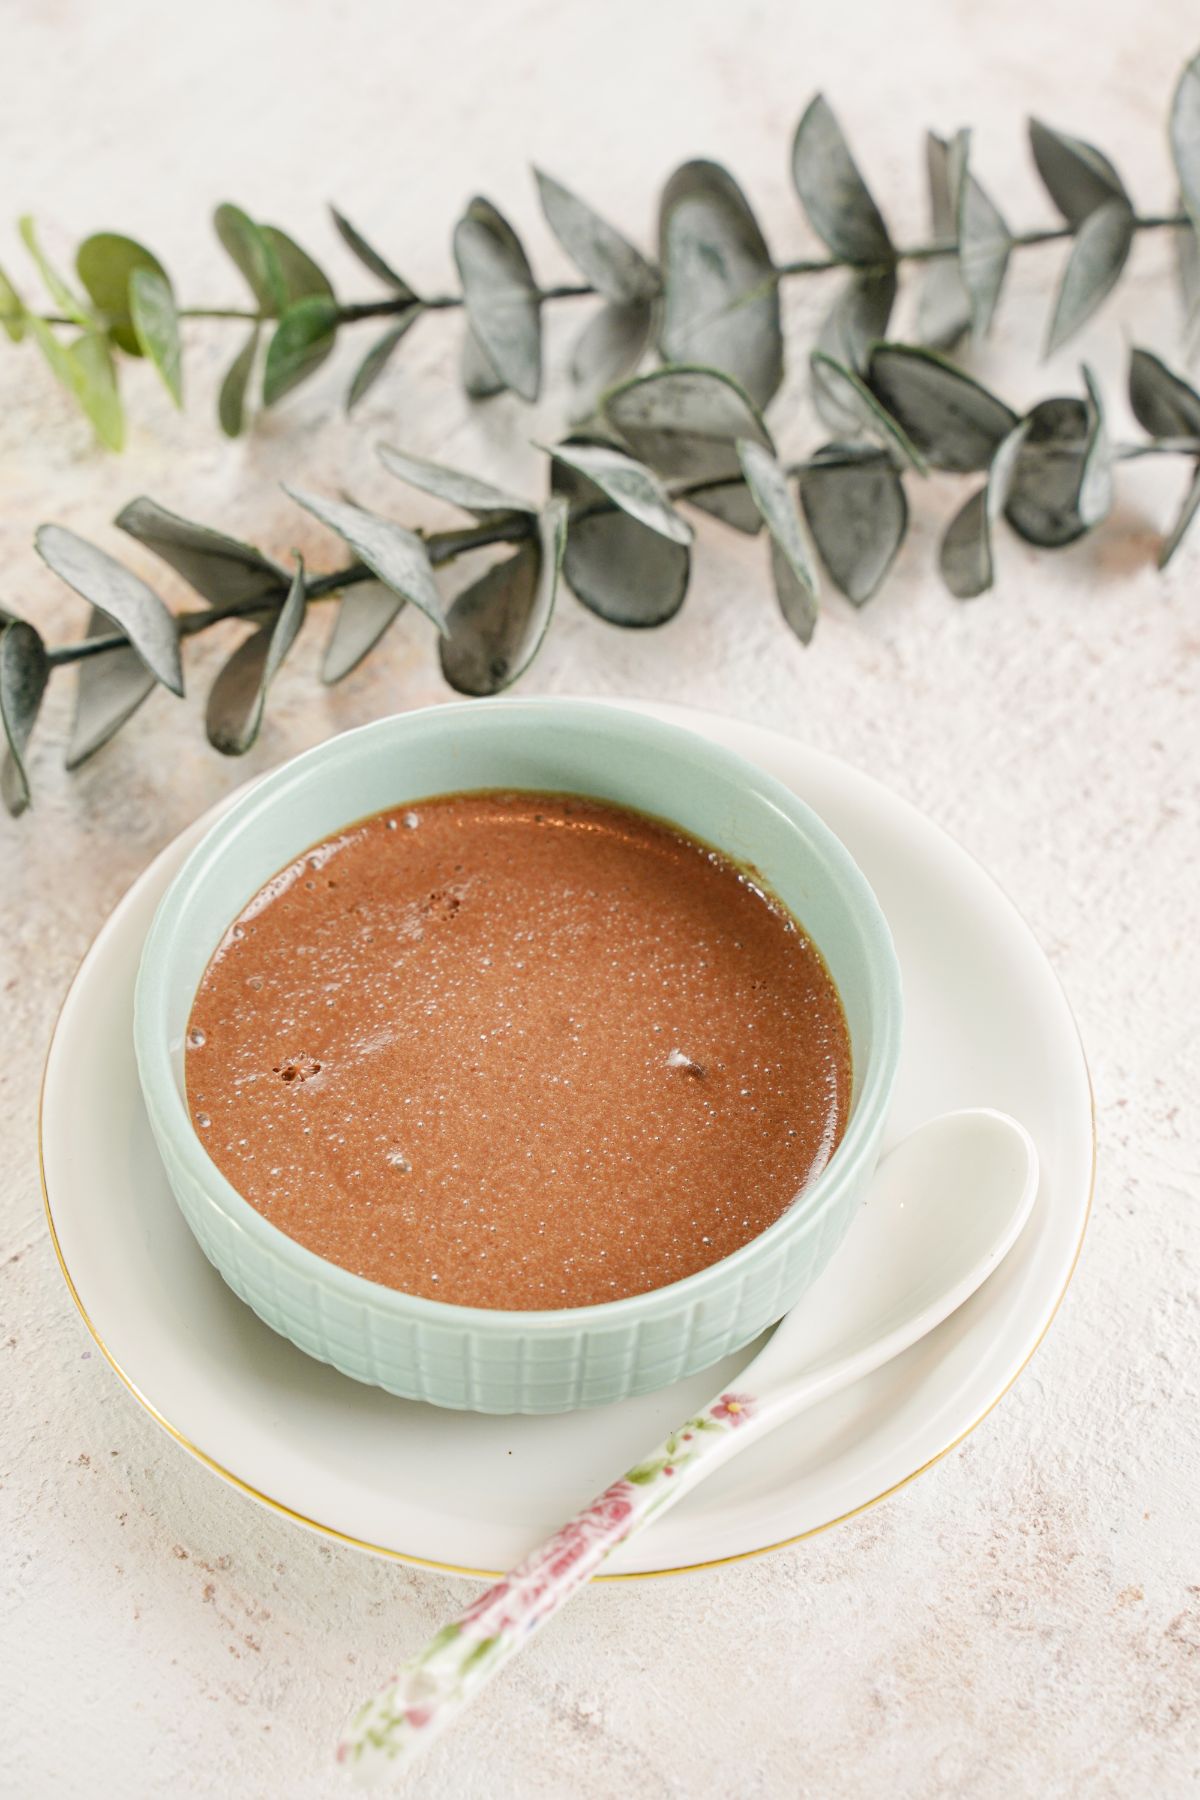 Chocolate Pots de Creme in a bowl with plate and spoon